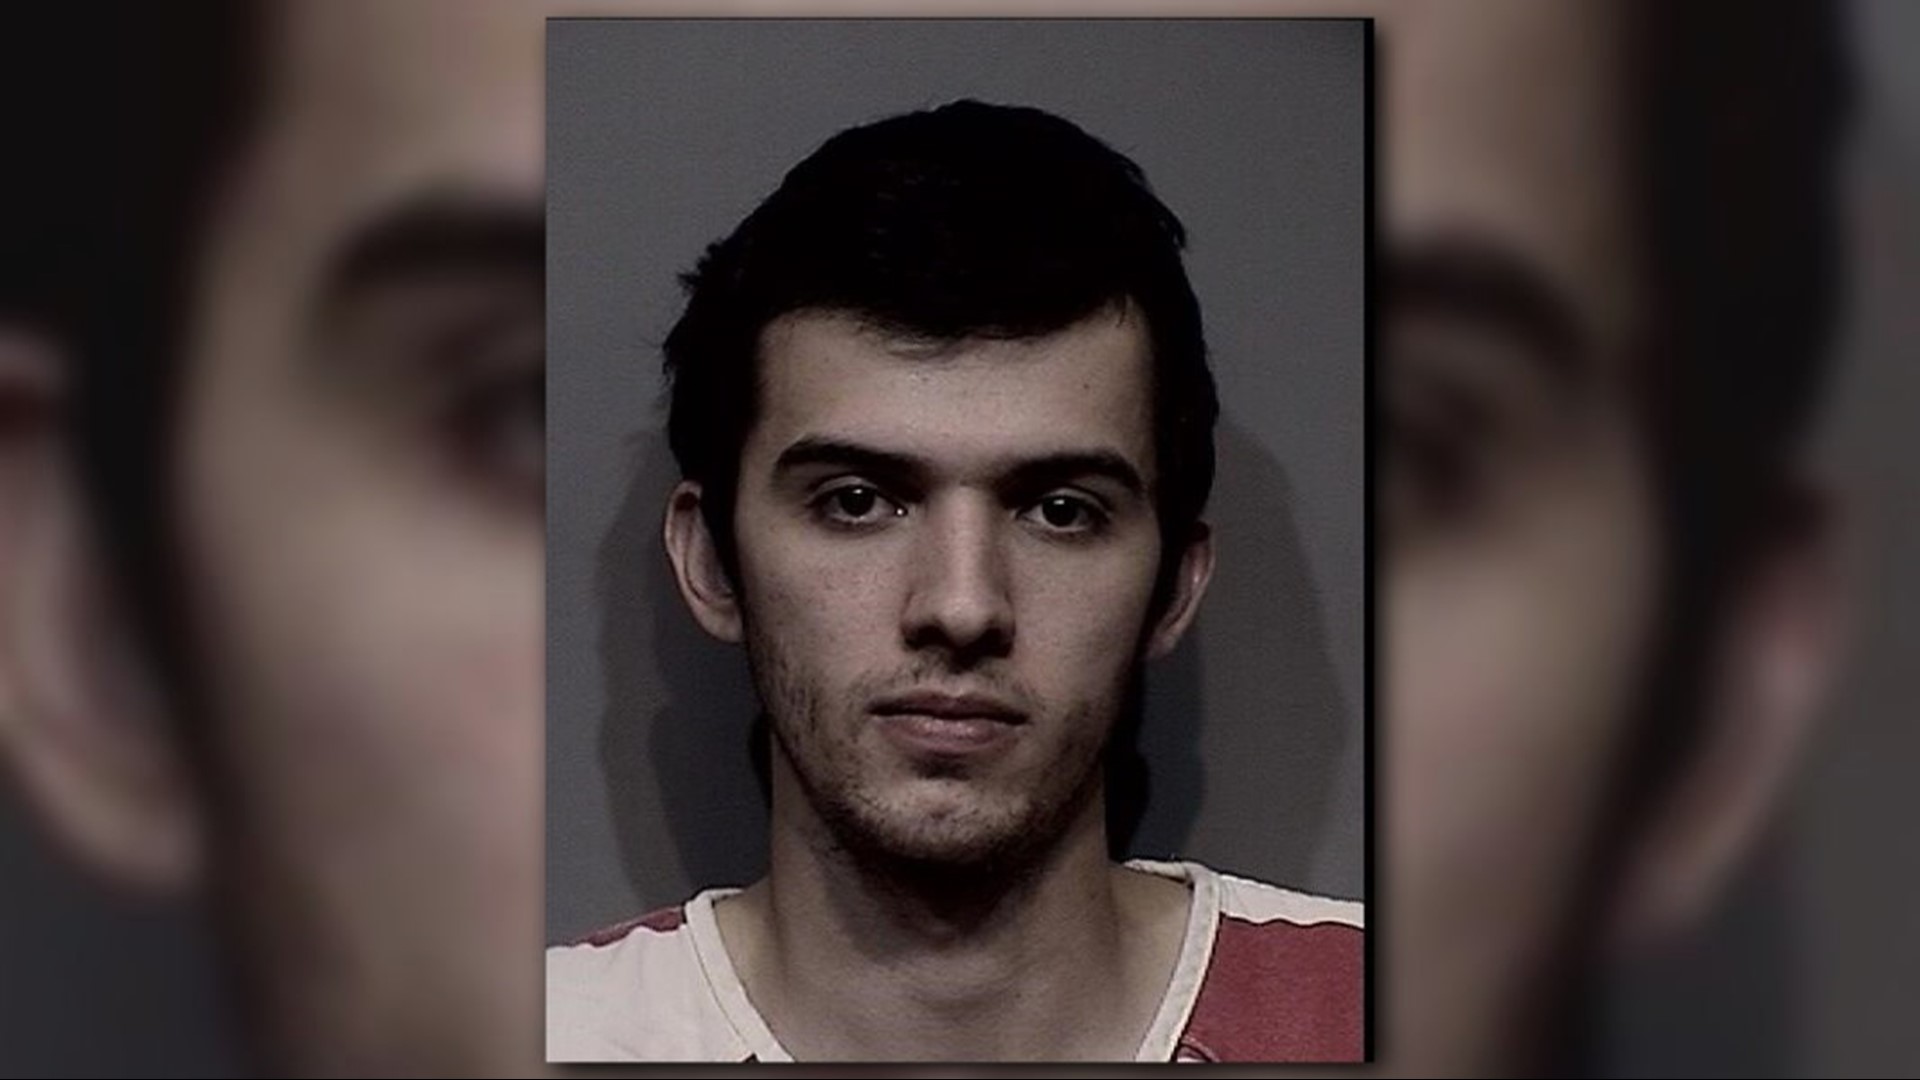 Cody Hull was sentenced to 15 years in prison but is eligible for parole after first five years. Hull entered an Alford plea to a charge of manslaughter for the 2017 death of his girlfriend's seven-month-old child in Rathdrum.